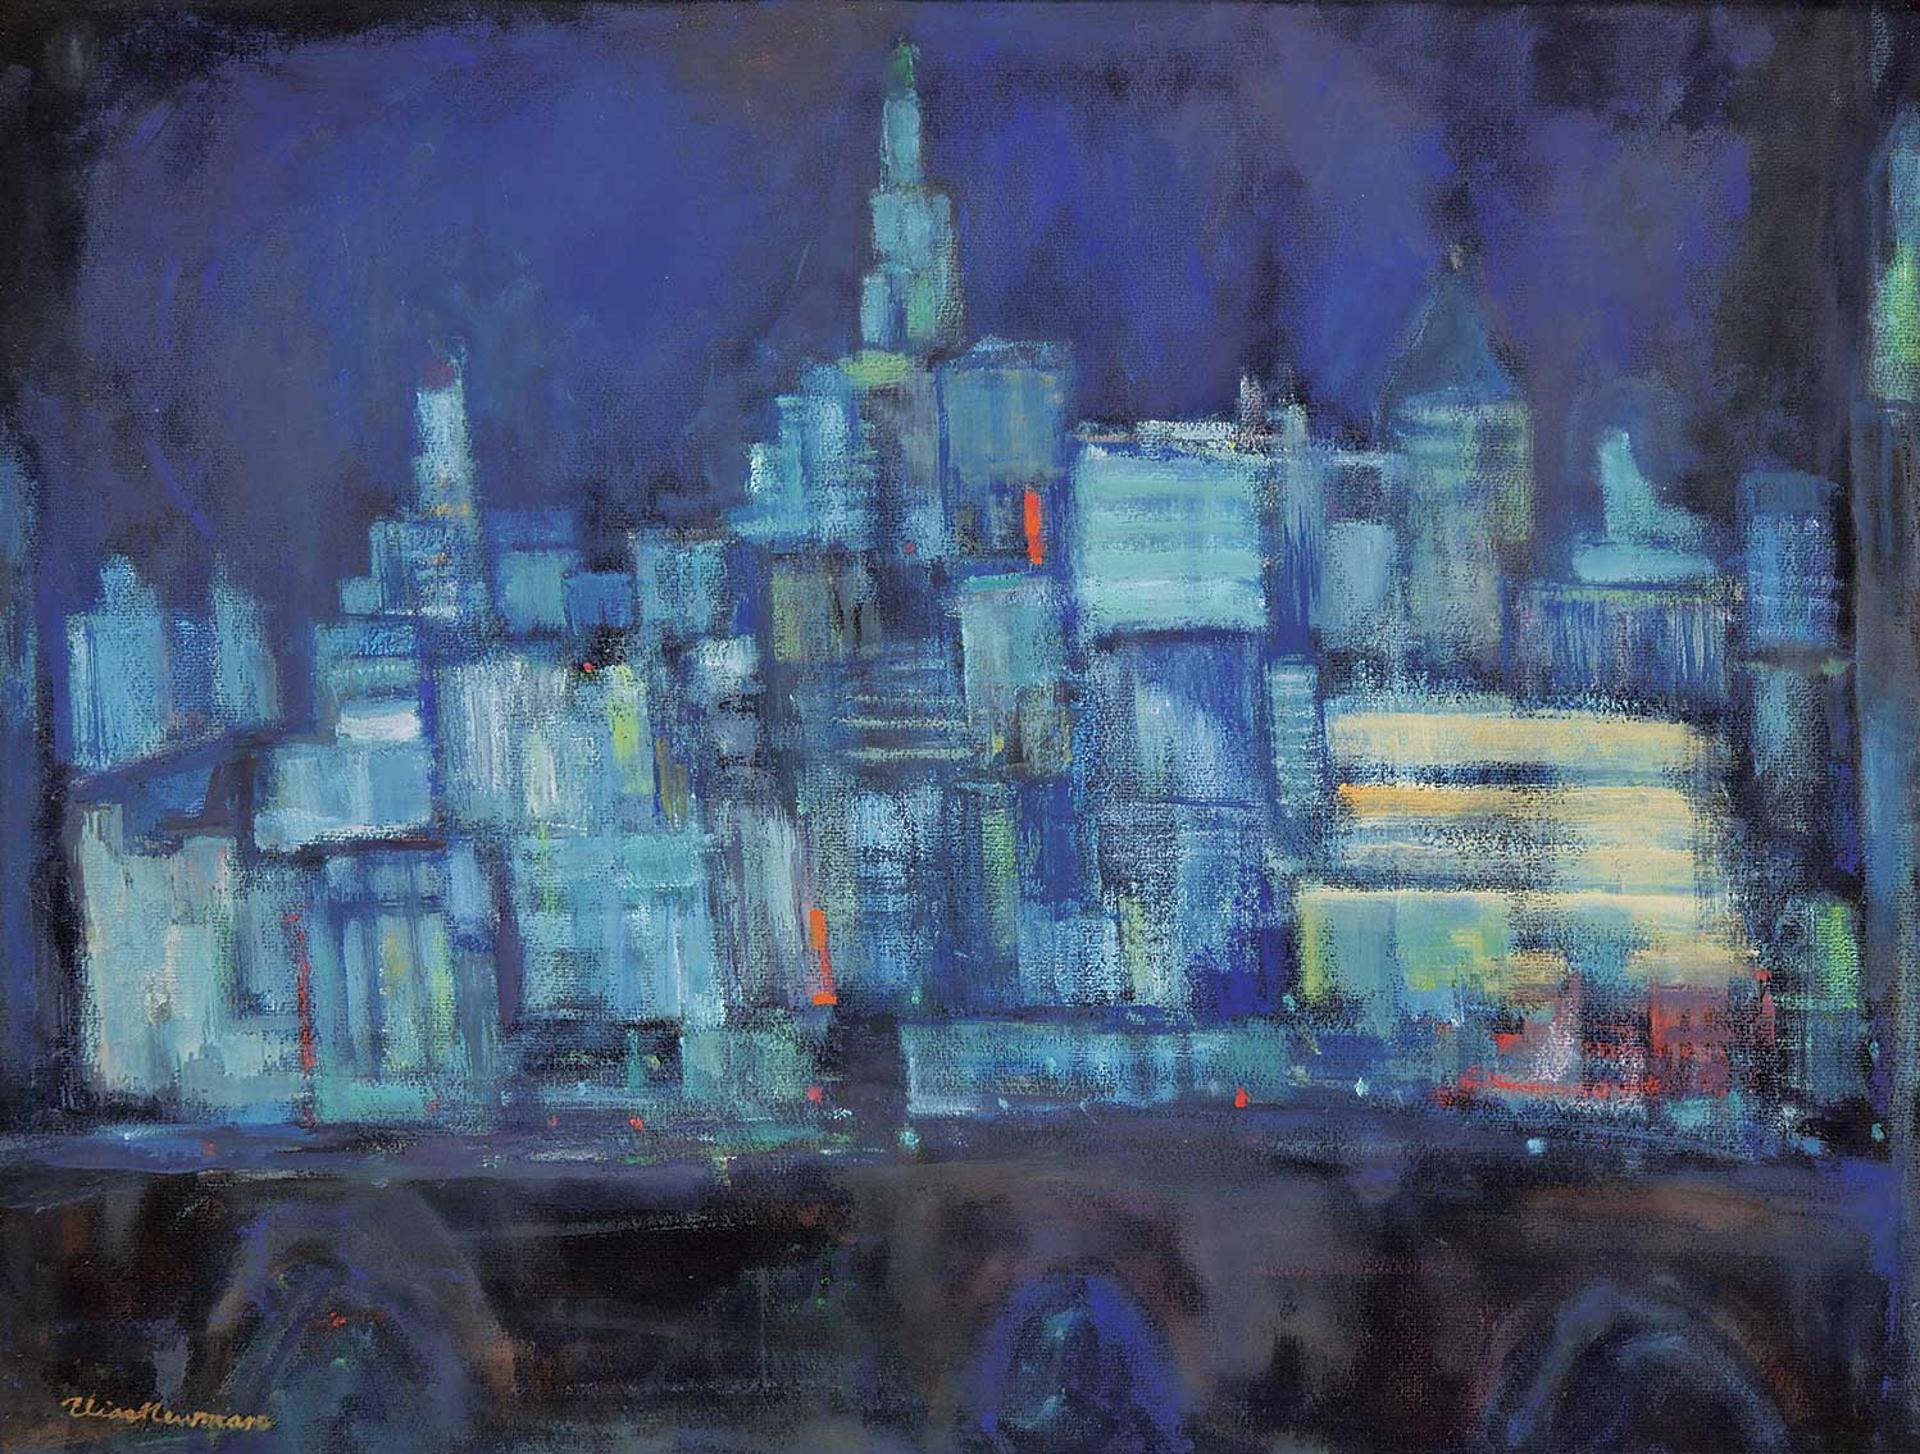 Elias Newman - Untitled - Abstract Skyline